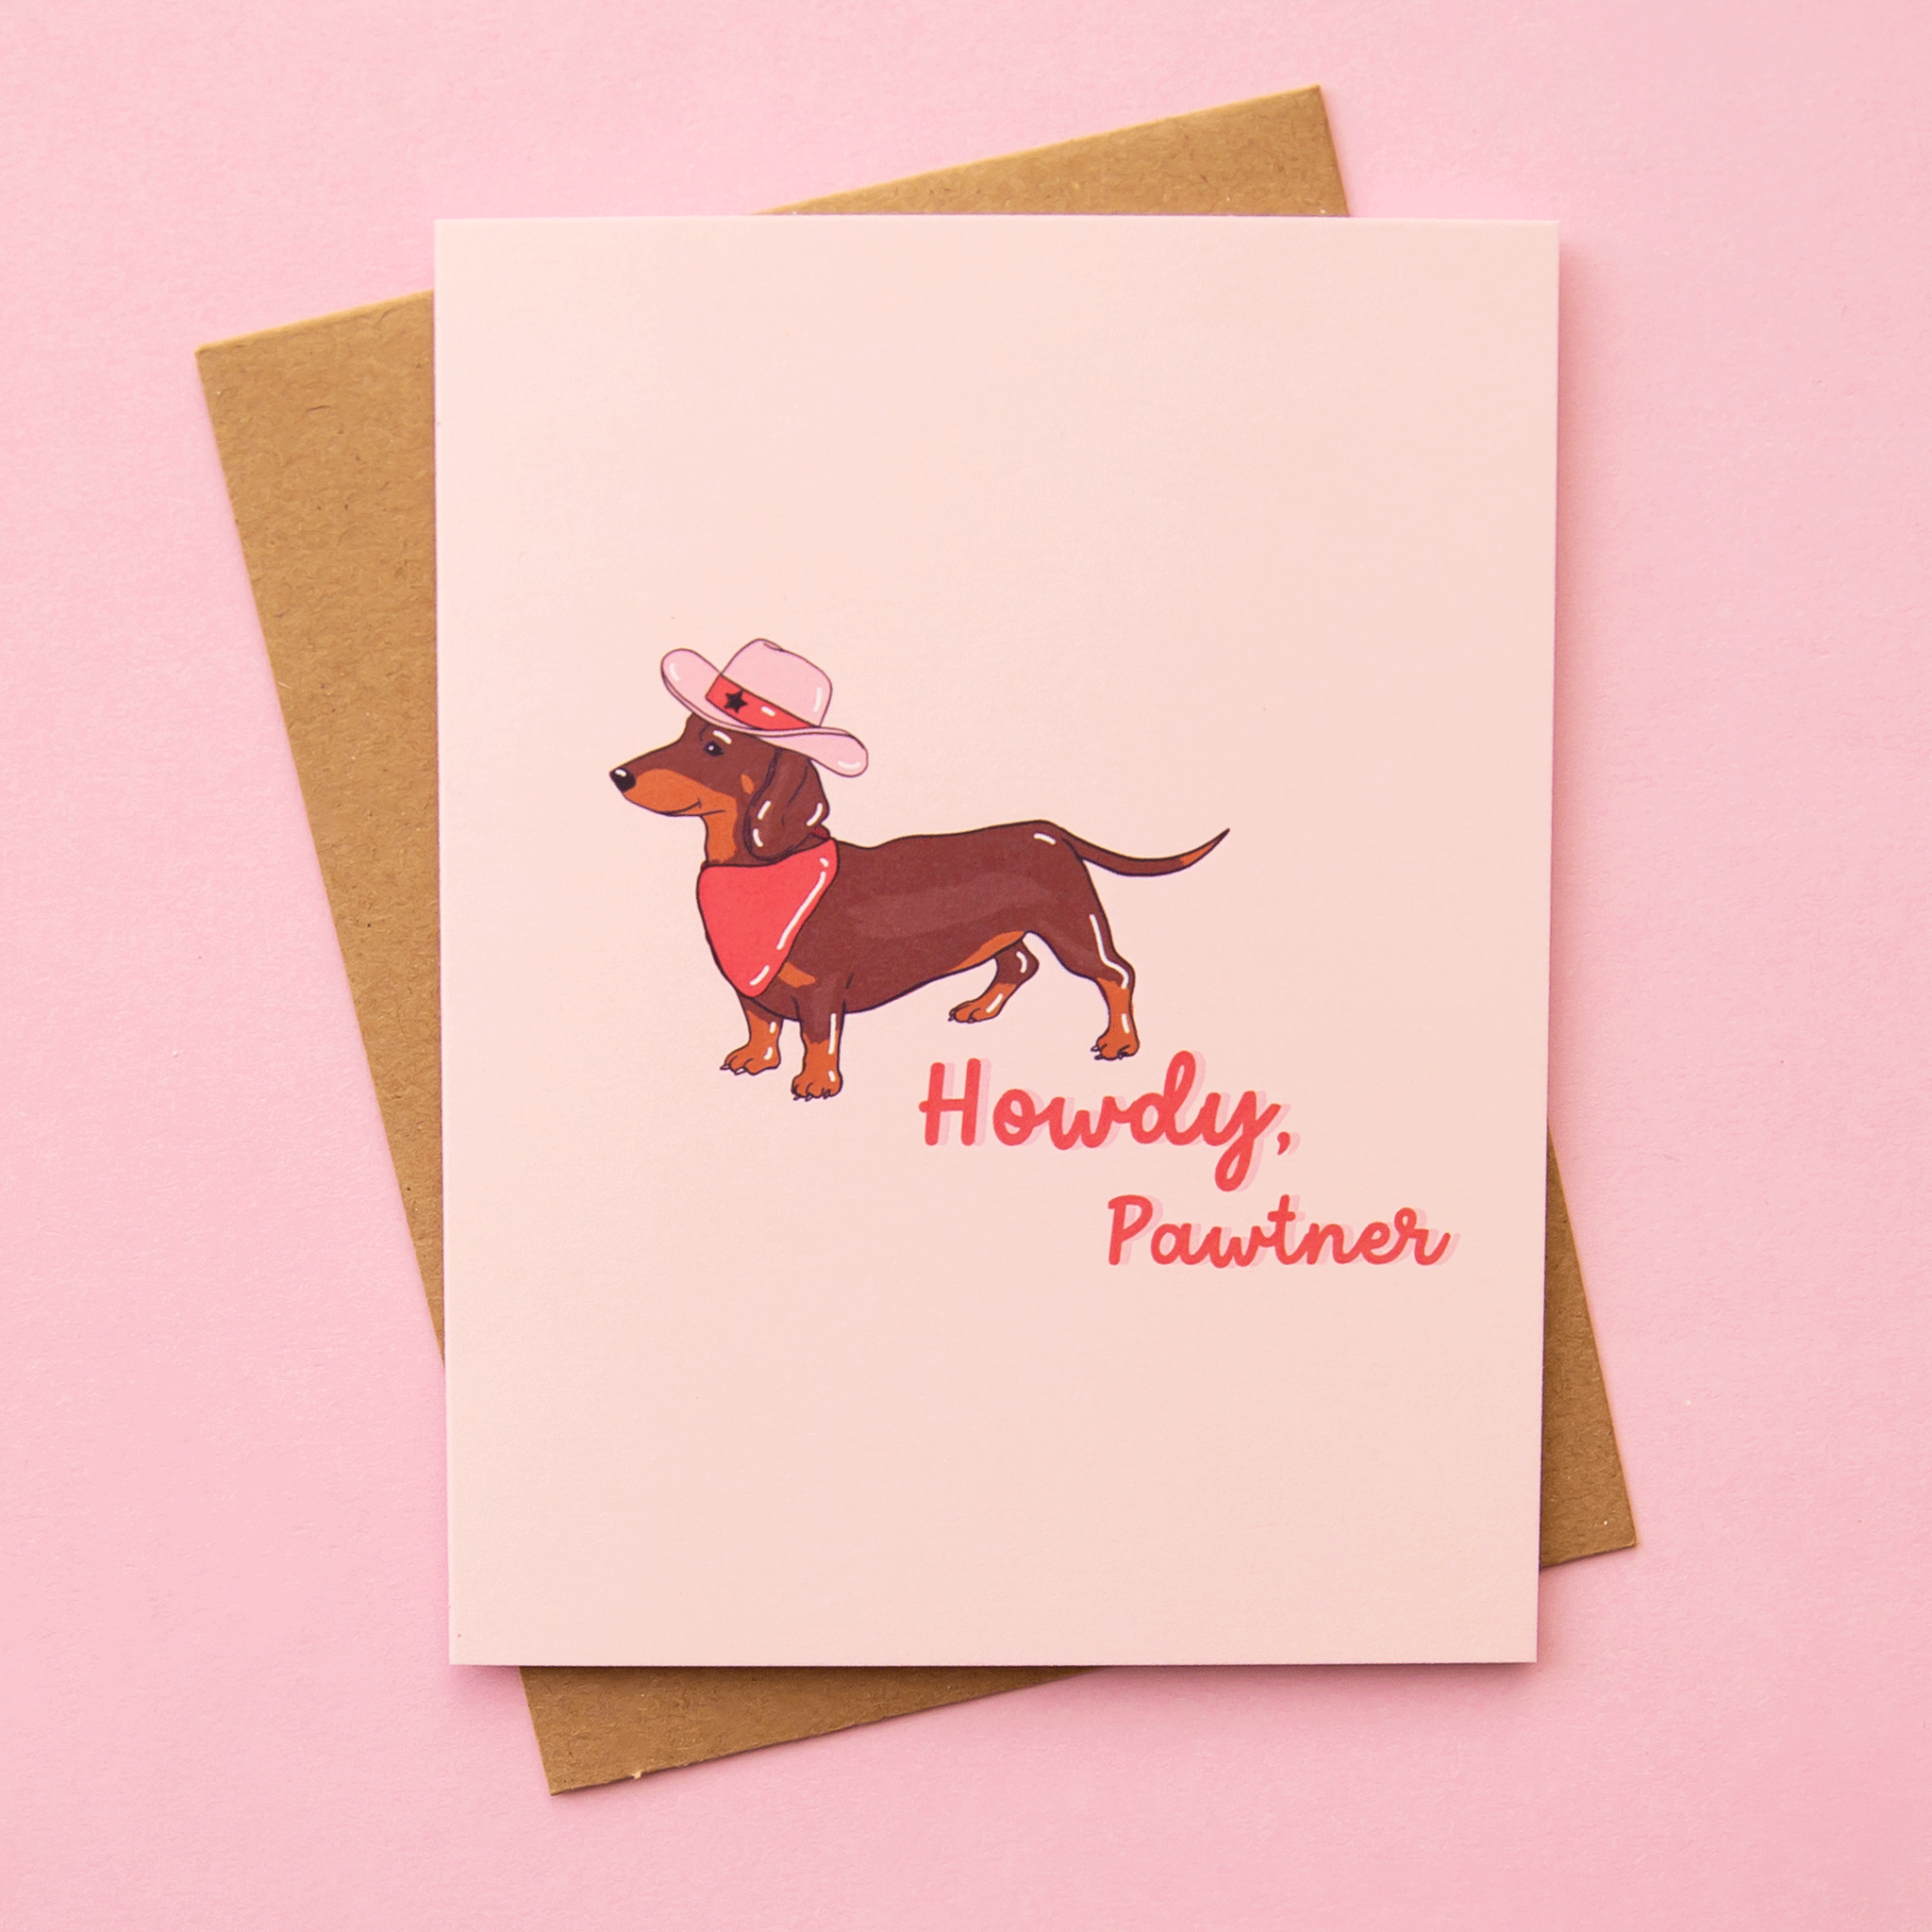 On a pink background is a light pink card with an image of a Weiner dog in a pink bandana and a western cowgirl hat along with pink cursive text to its right that reads, "Howdy Partner".